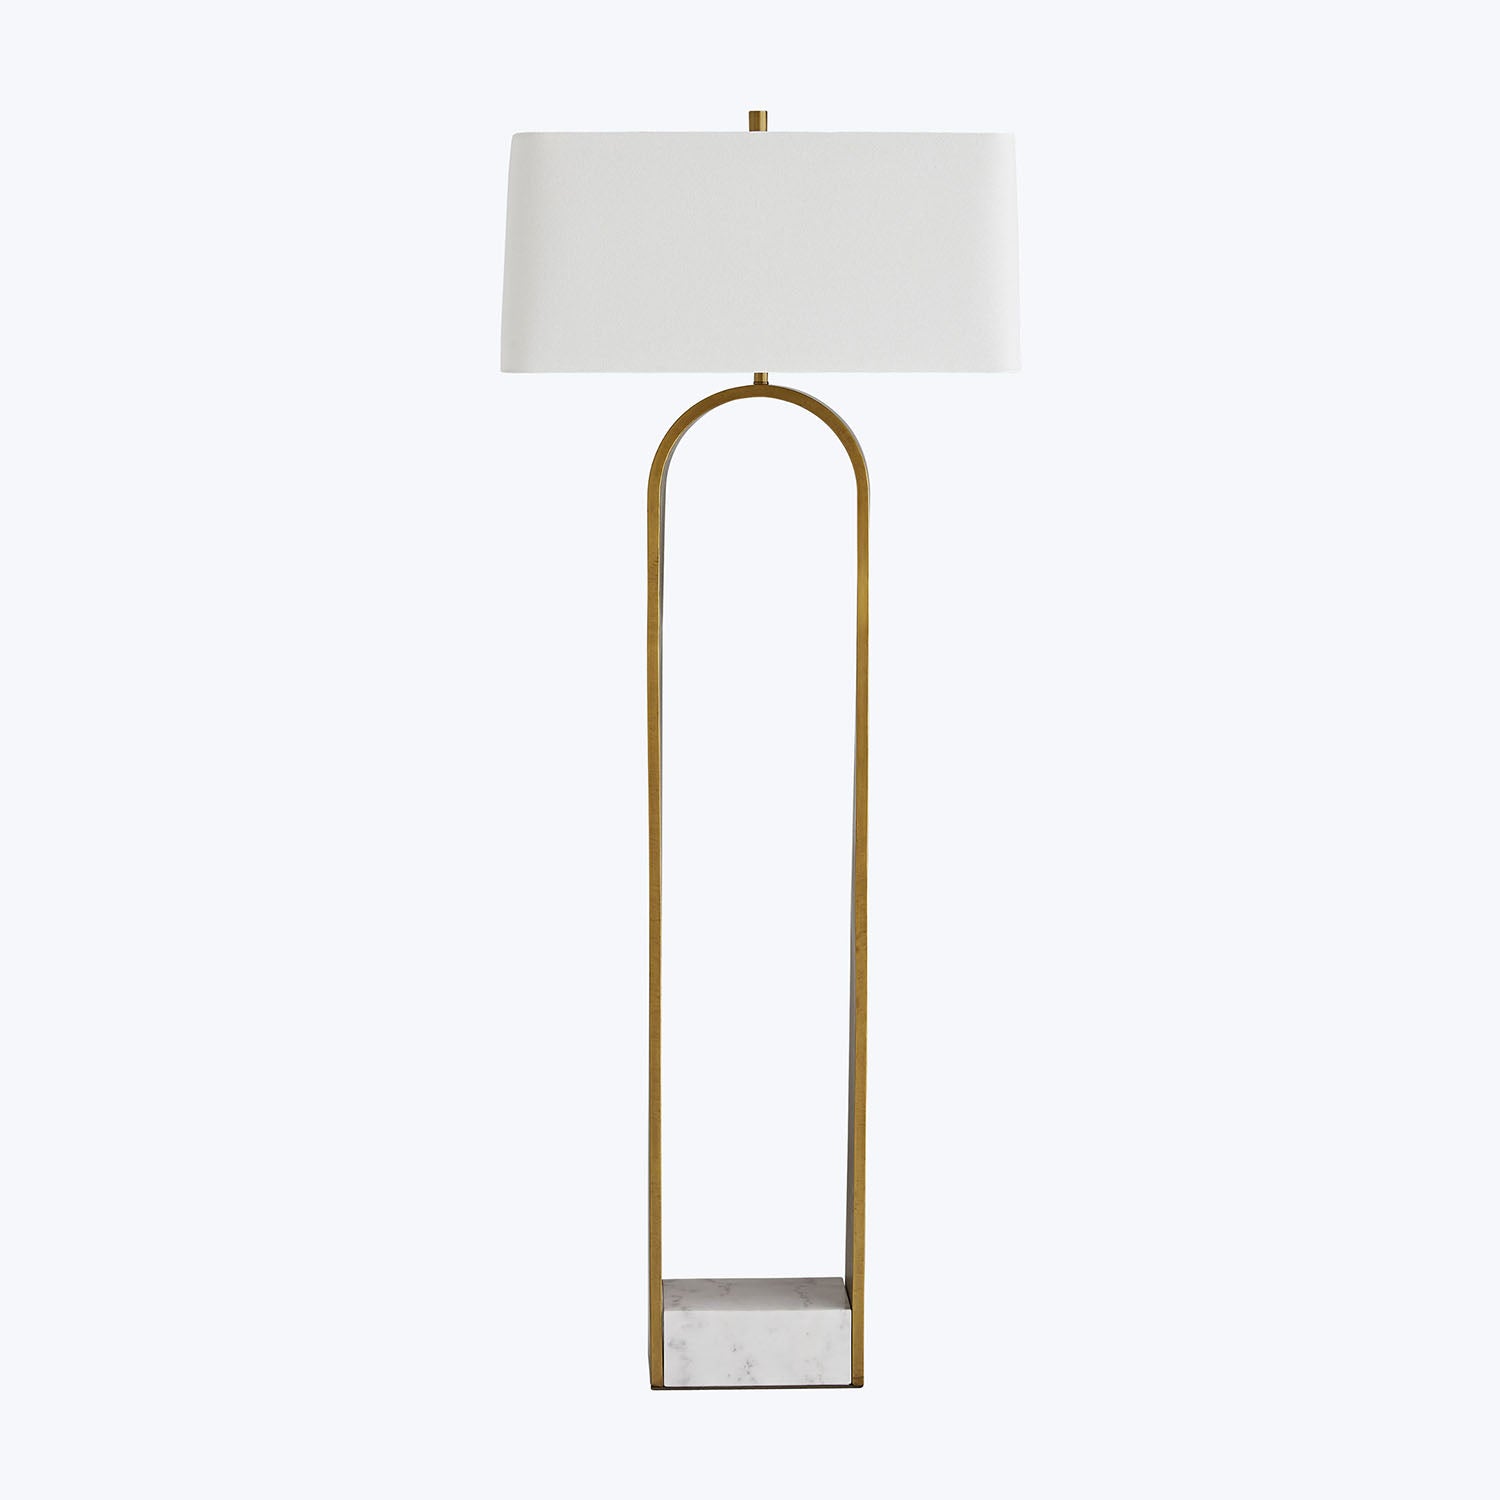 Modern floor lamp with gold finish and sleek lampshade design.